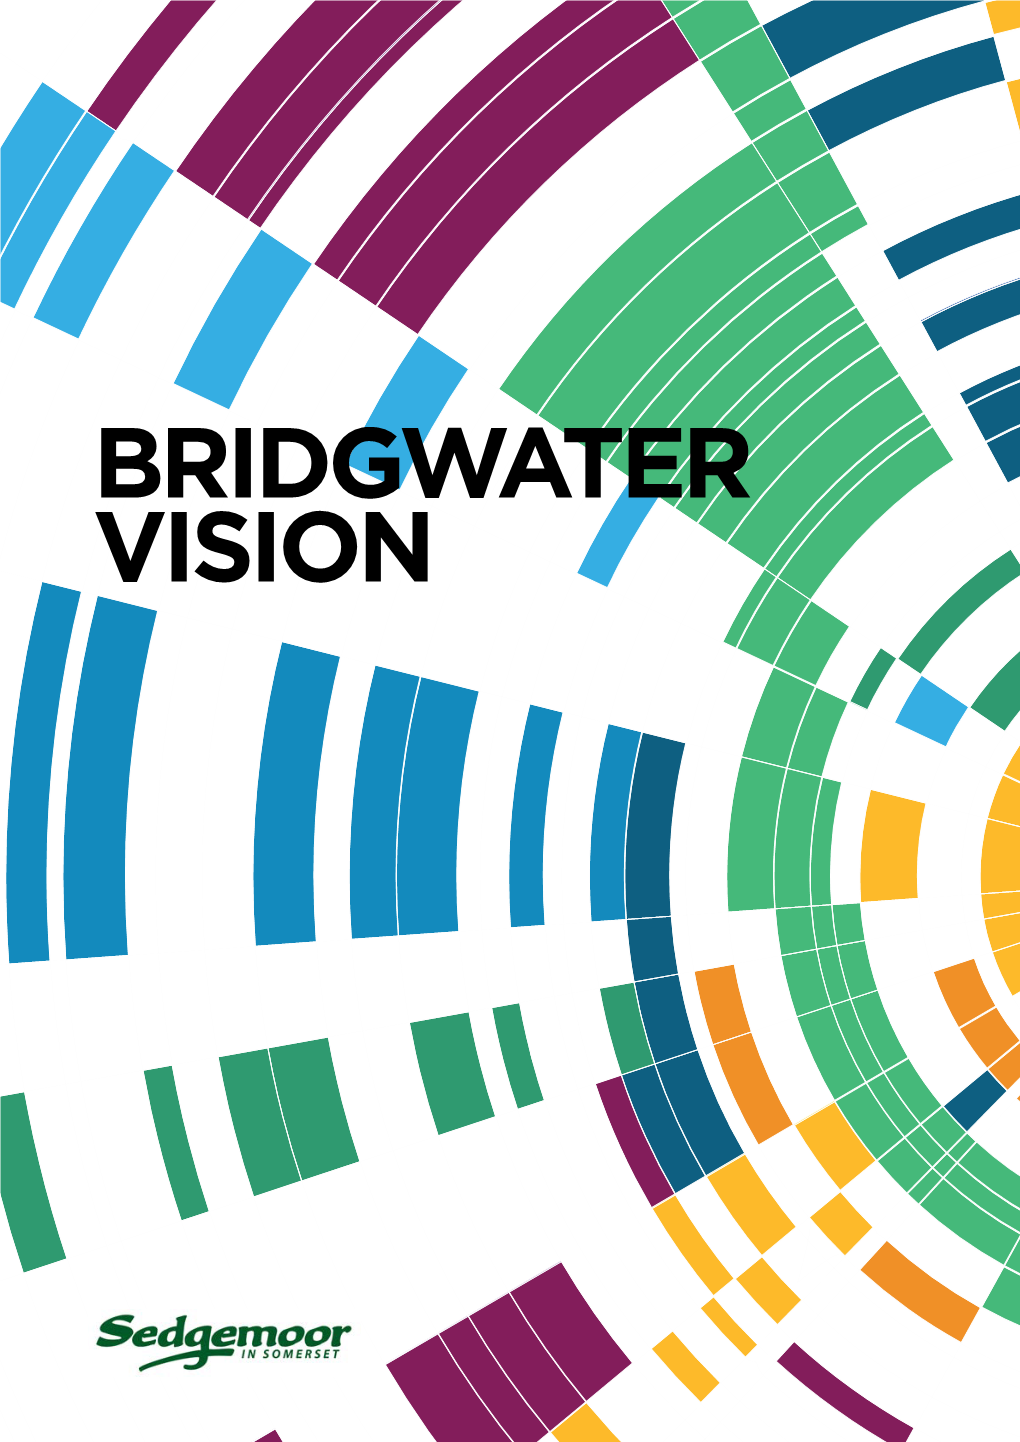 Bridgwater Vision Was Published in 2009, the Town Has Lived up to Its Proud Heritage and to Its Promise